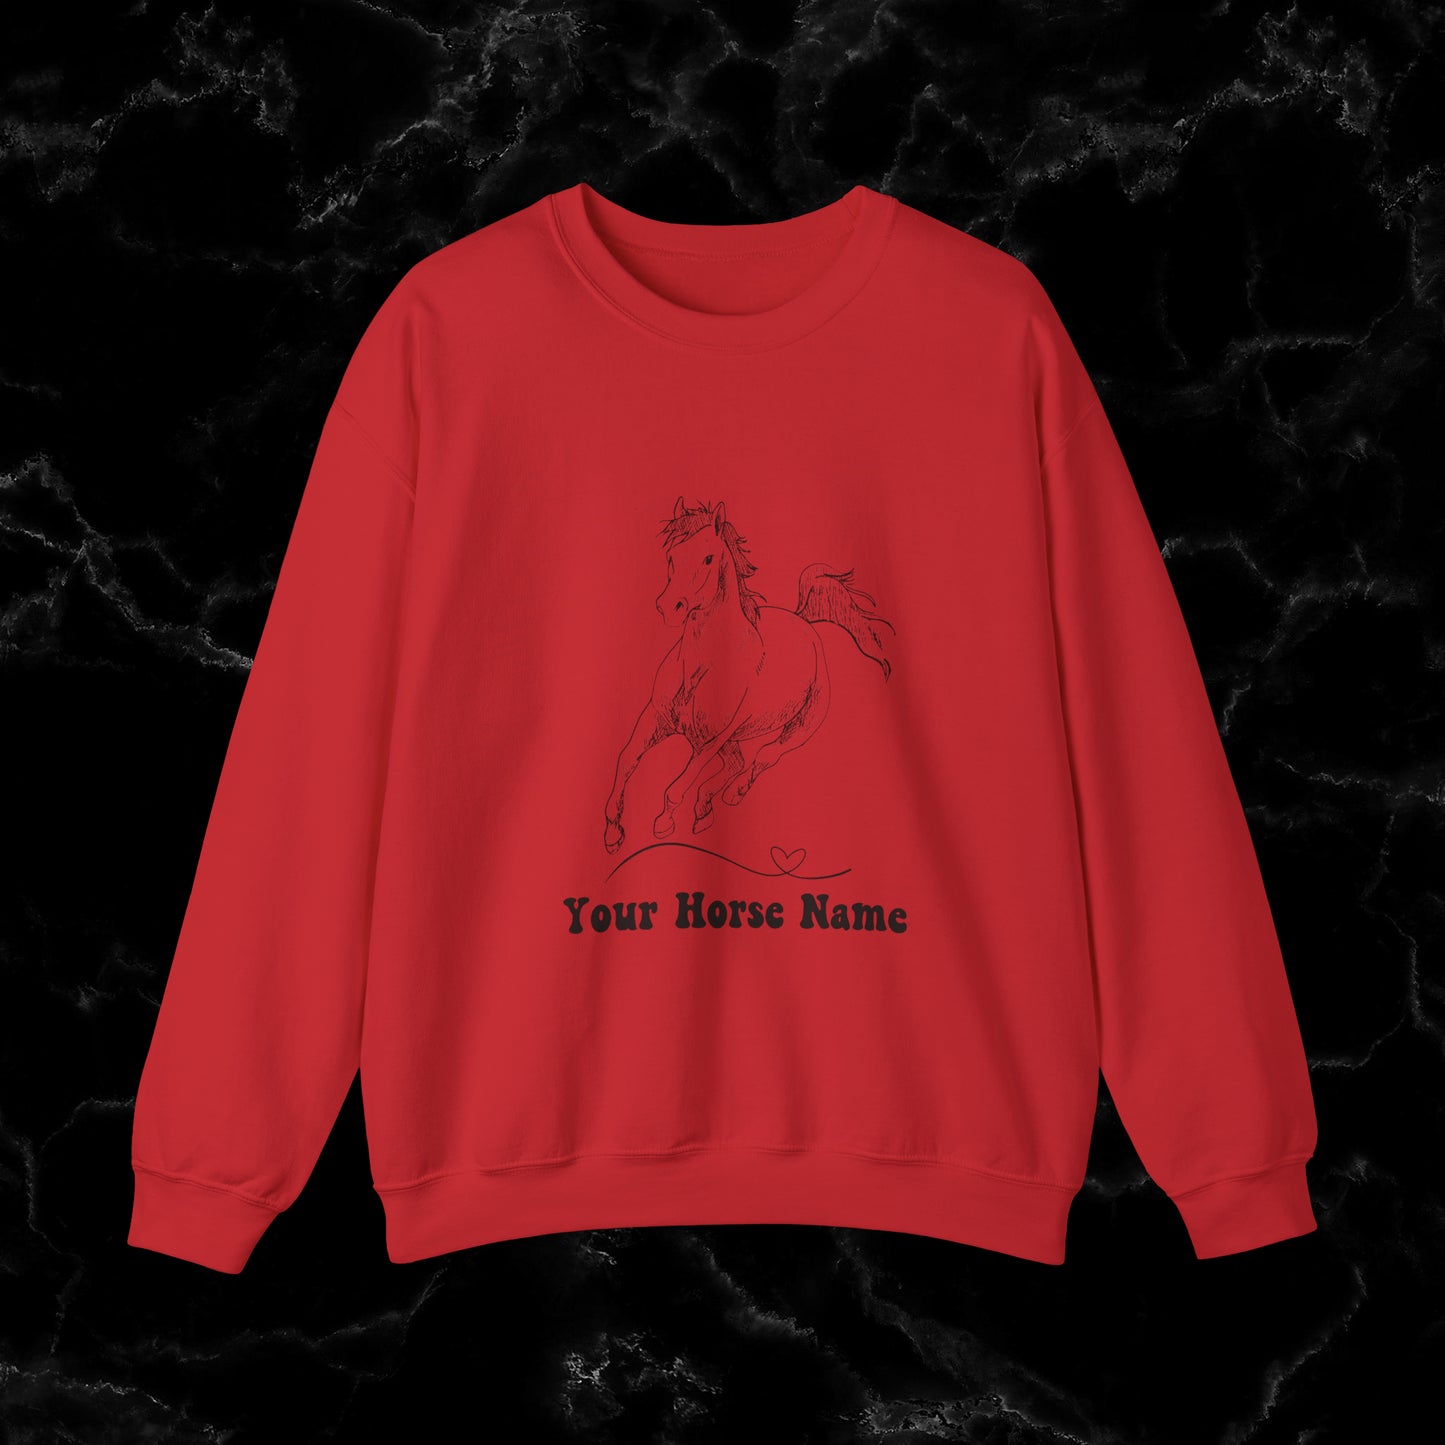 Personalized Horse Sweatshirt - Gift for Horse Owner, Perfect for Christmas, Birthdays, and Equestrian Enthusiasts - Wrap Up Warmth and Personal Connection with this Thoughtful Horse Lover's Gift Sweatshirt S Red 